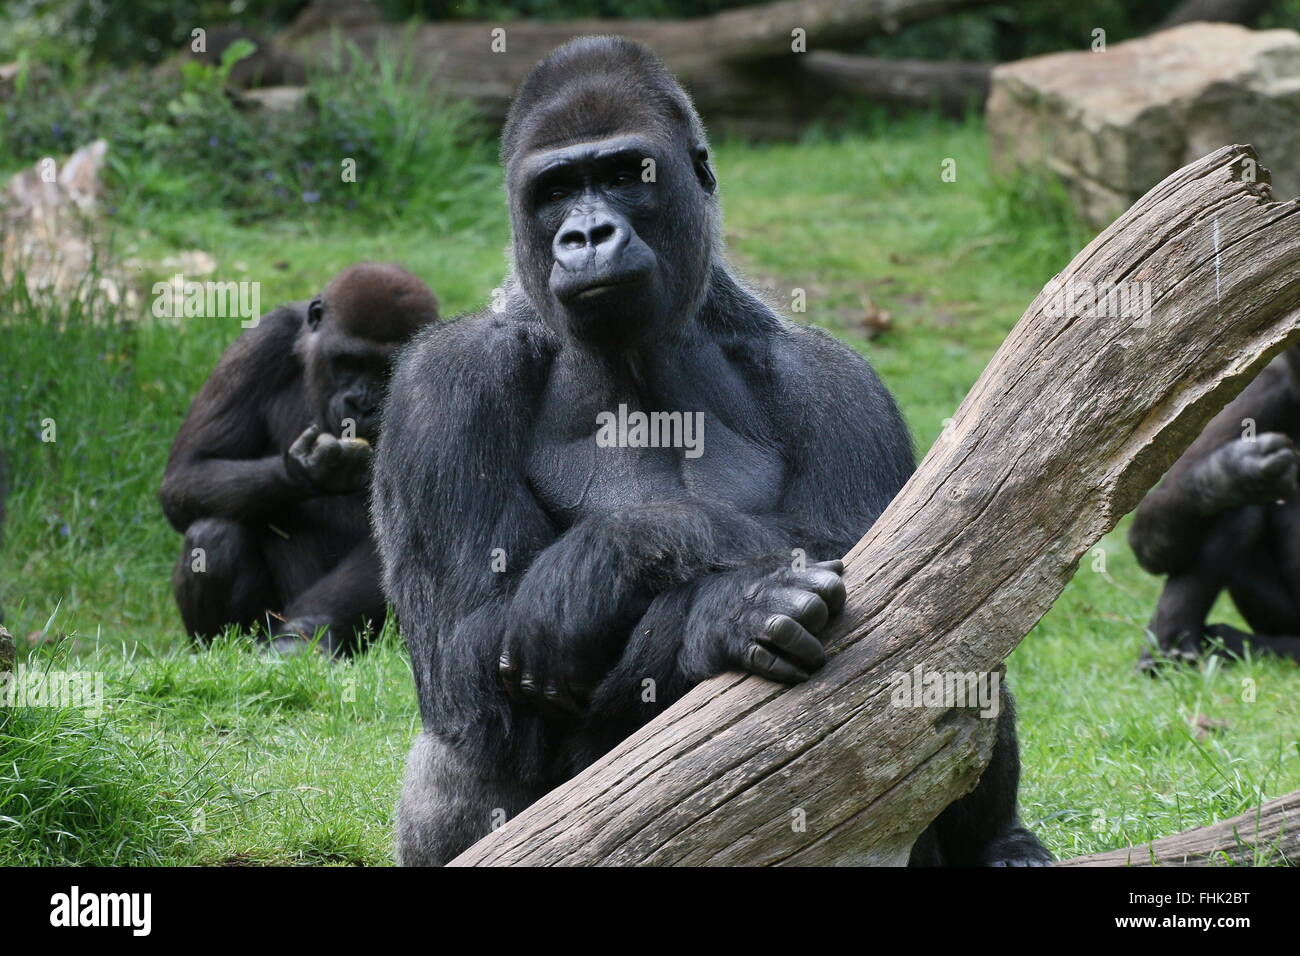 Mature silverback Western lowland gorilla, another young gorilla in the background Stock Photo